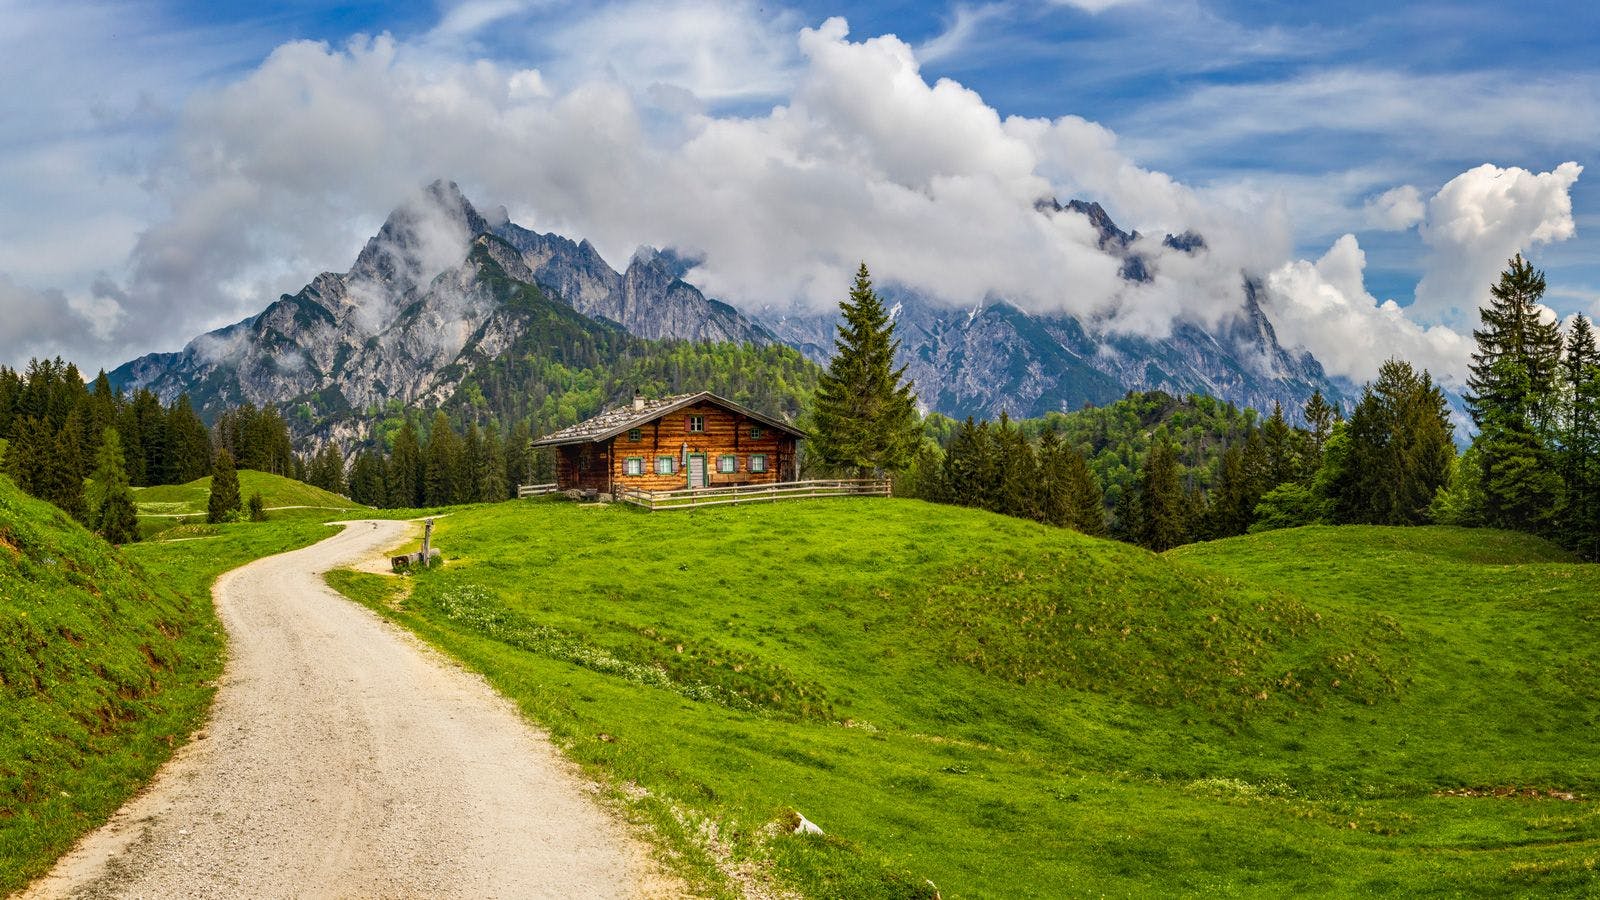 A small cabin by a Swiss mountain